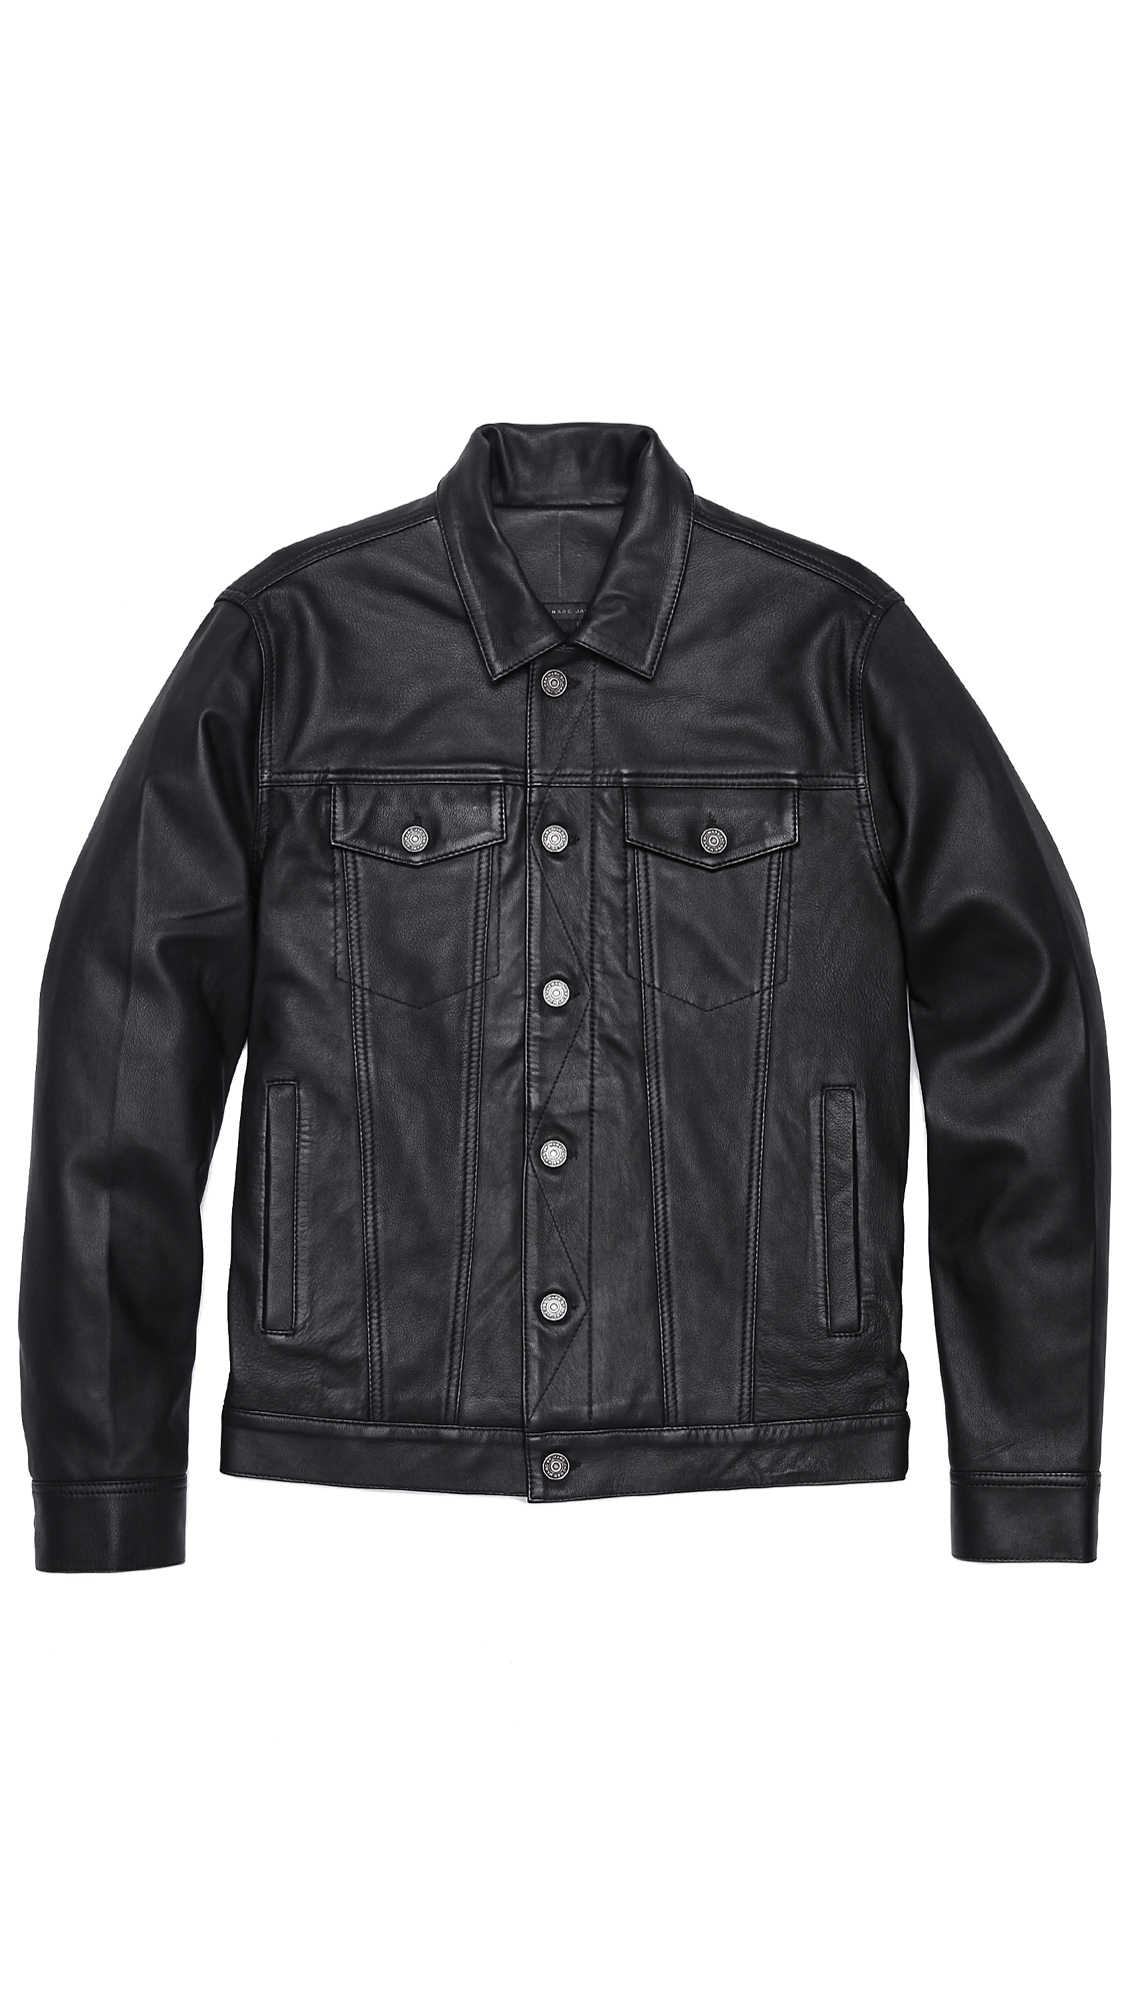 Marc By Marc Jacobs Lambskin Leather Jacket in Black for Men (Orcha ...